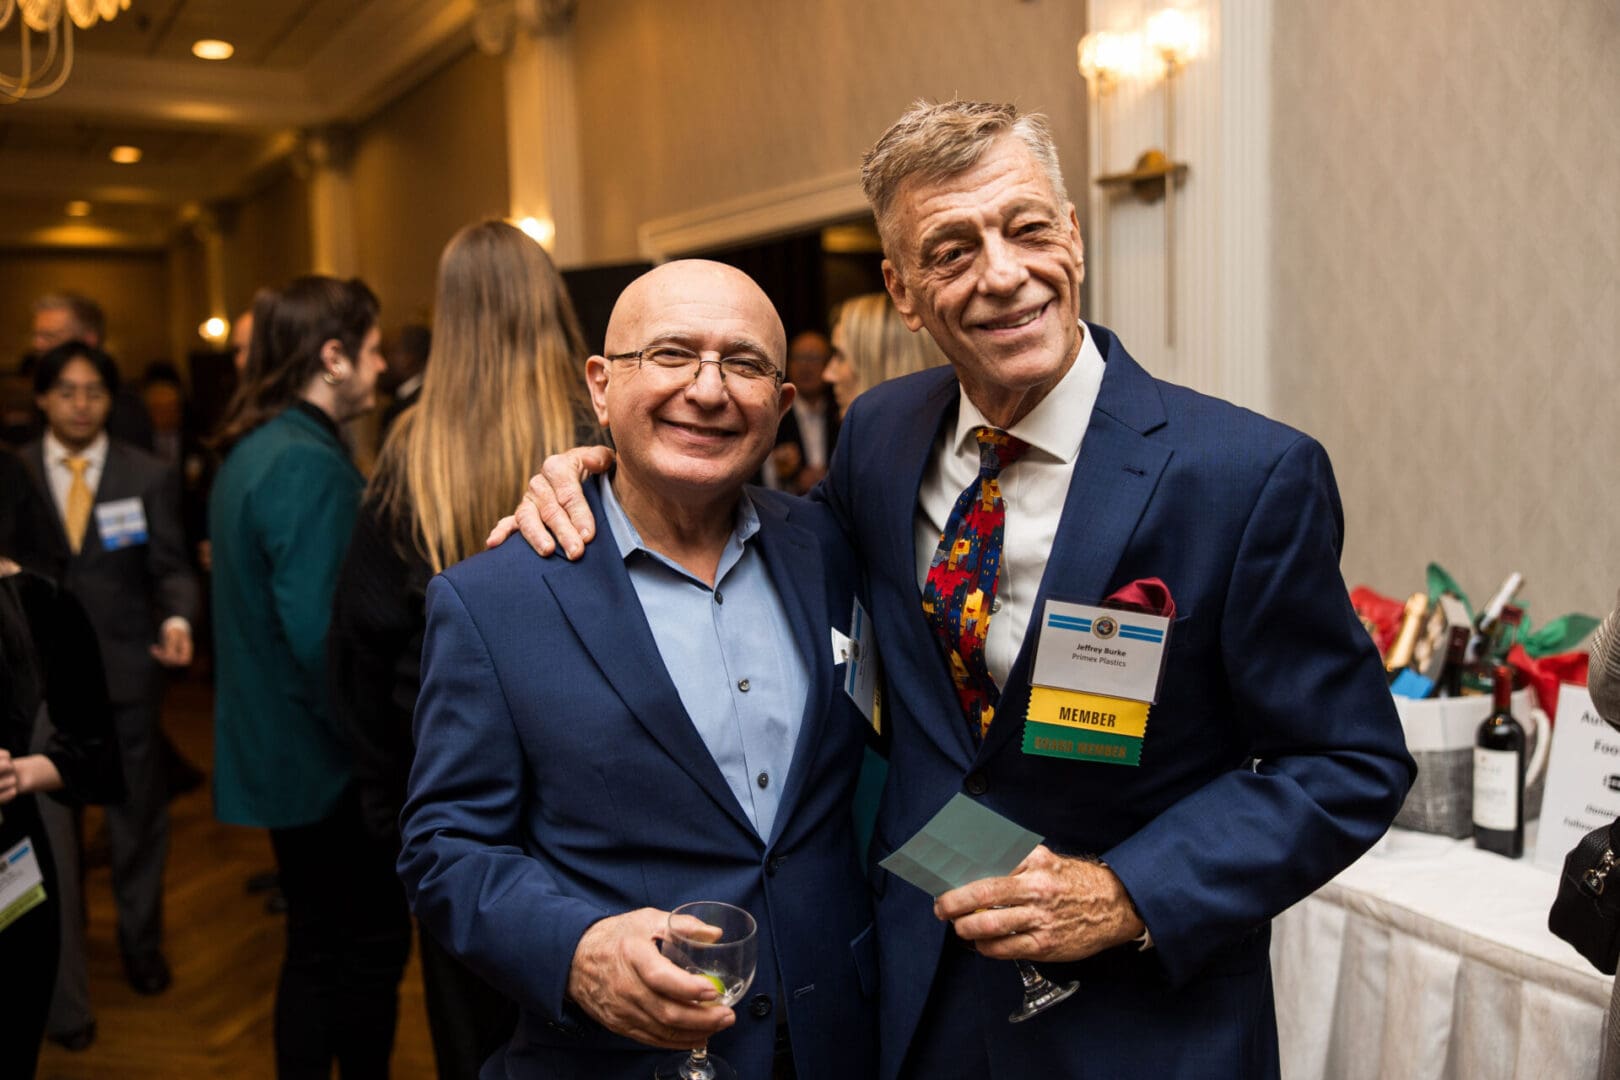 Two men posing for a photo at an event.